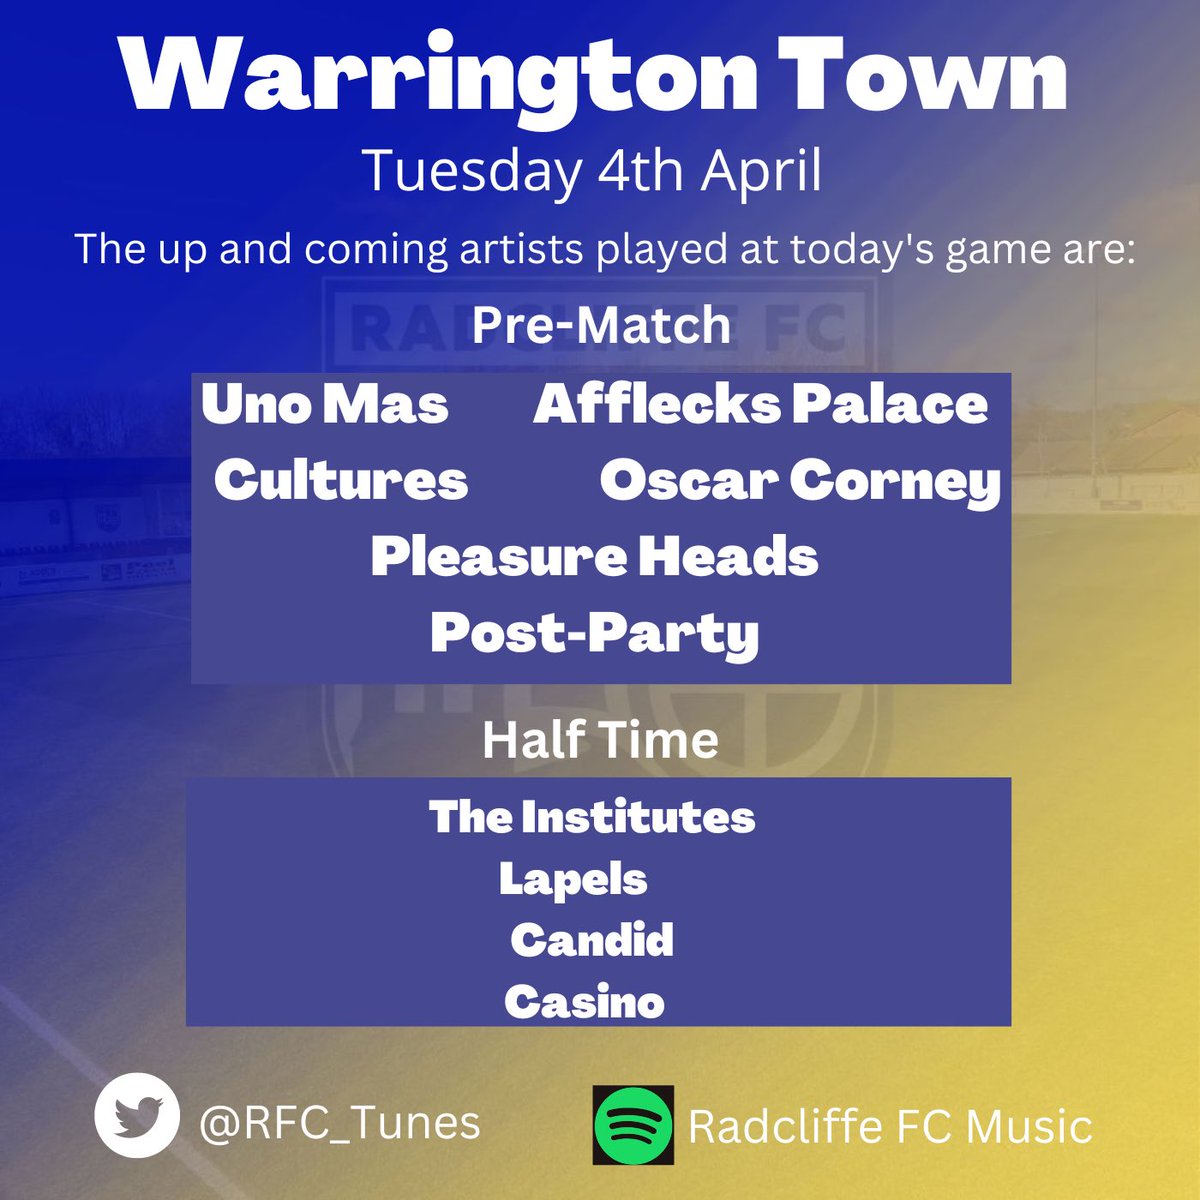 Massive game tonight, as @radcliffeboro (4th) take on @theyellows (3rd) in the @NorthernPremLge. Better pull the big tunes out then, here’s the emerging artists on tonights playlist